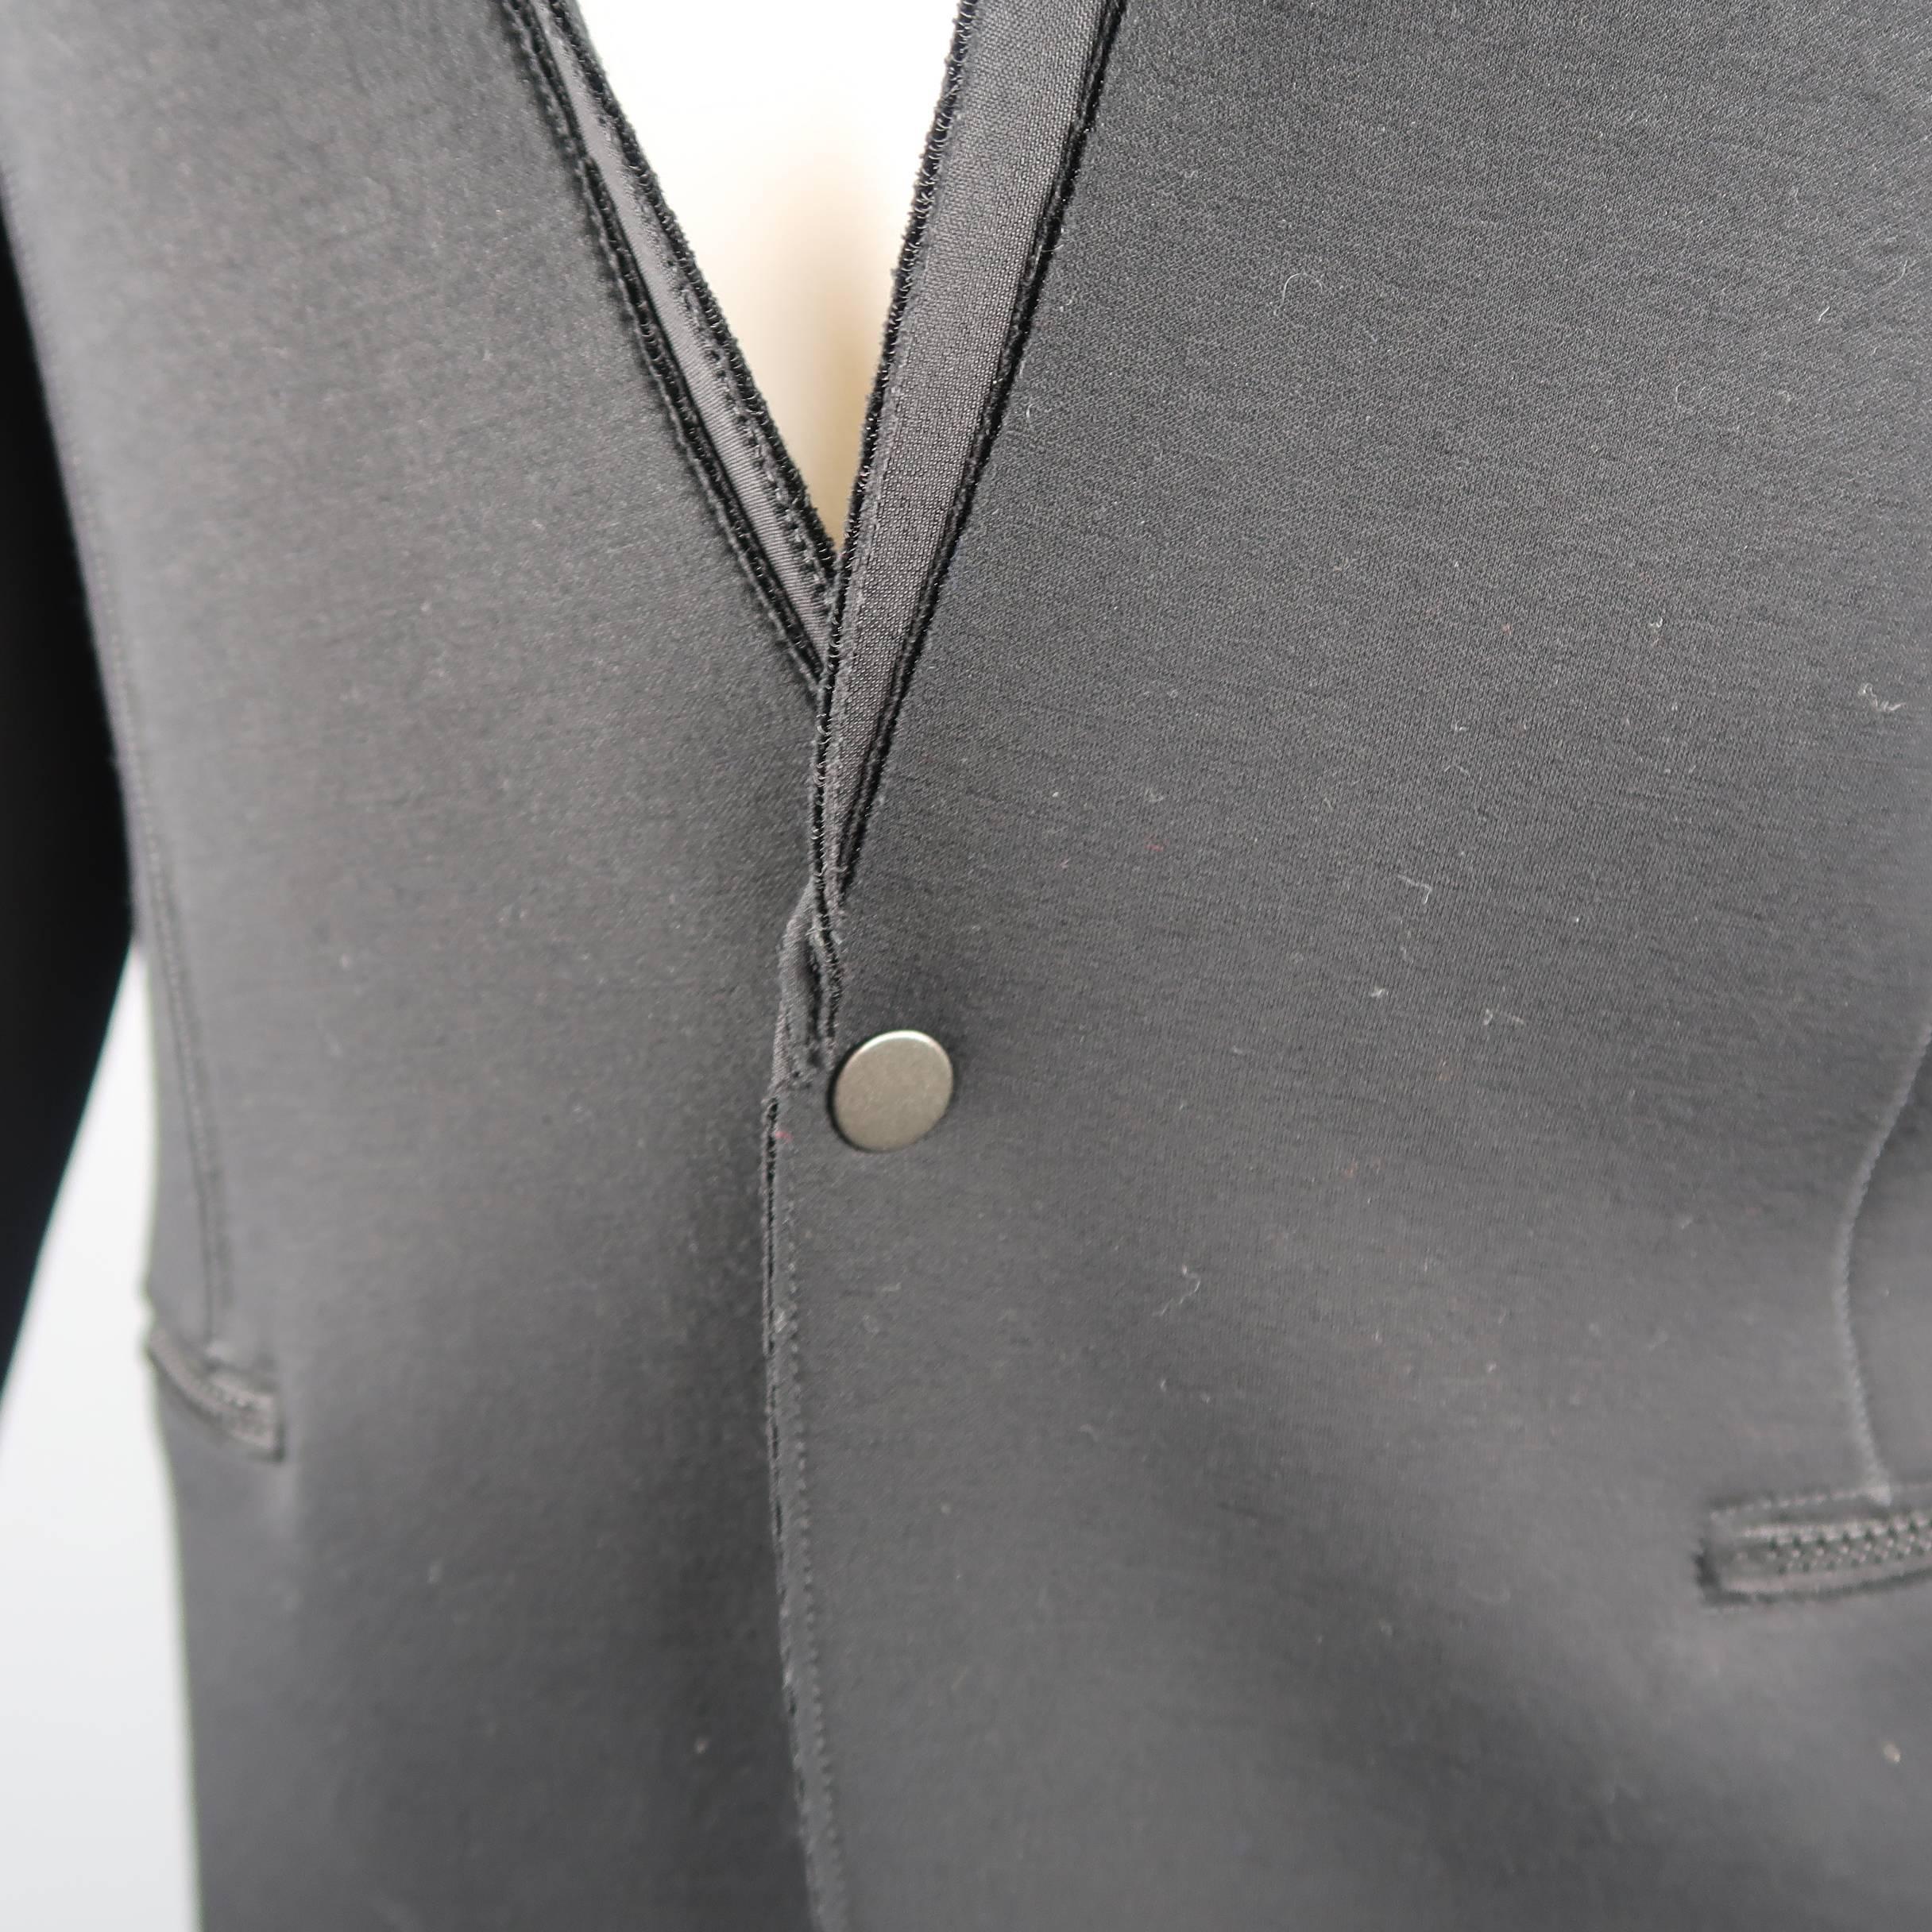 LANVIN sport coat comes in black neoprene material with single snap closure front, zip pockets, reverse seams, and notch lapel. Made in Italy.
 
Excellent Pre-Owned Condition.
Marked: M
 
Measurements:
 
Shoulder: 21 in.
Chest: 42 in.
Sleeve: 23